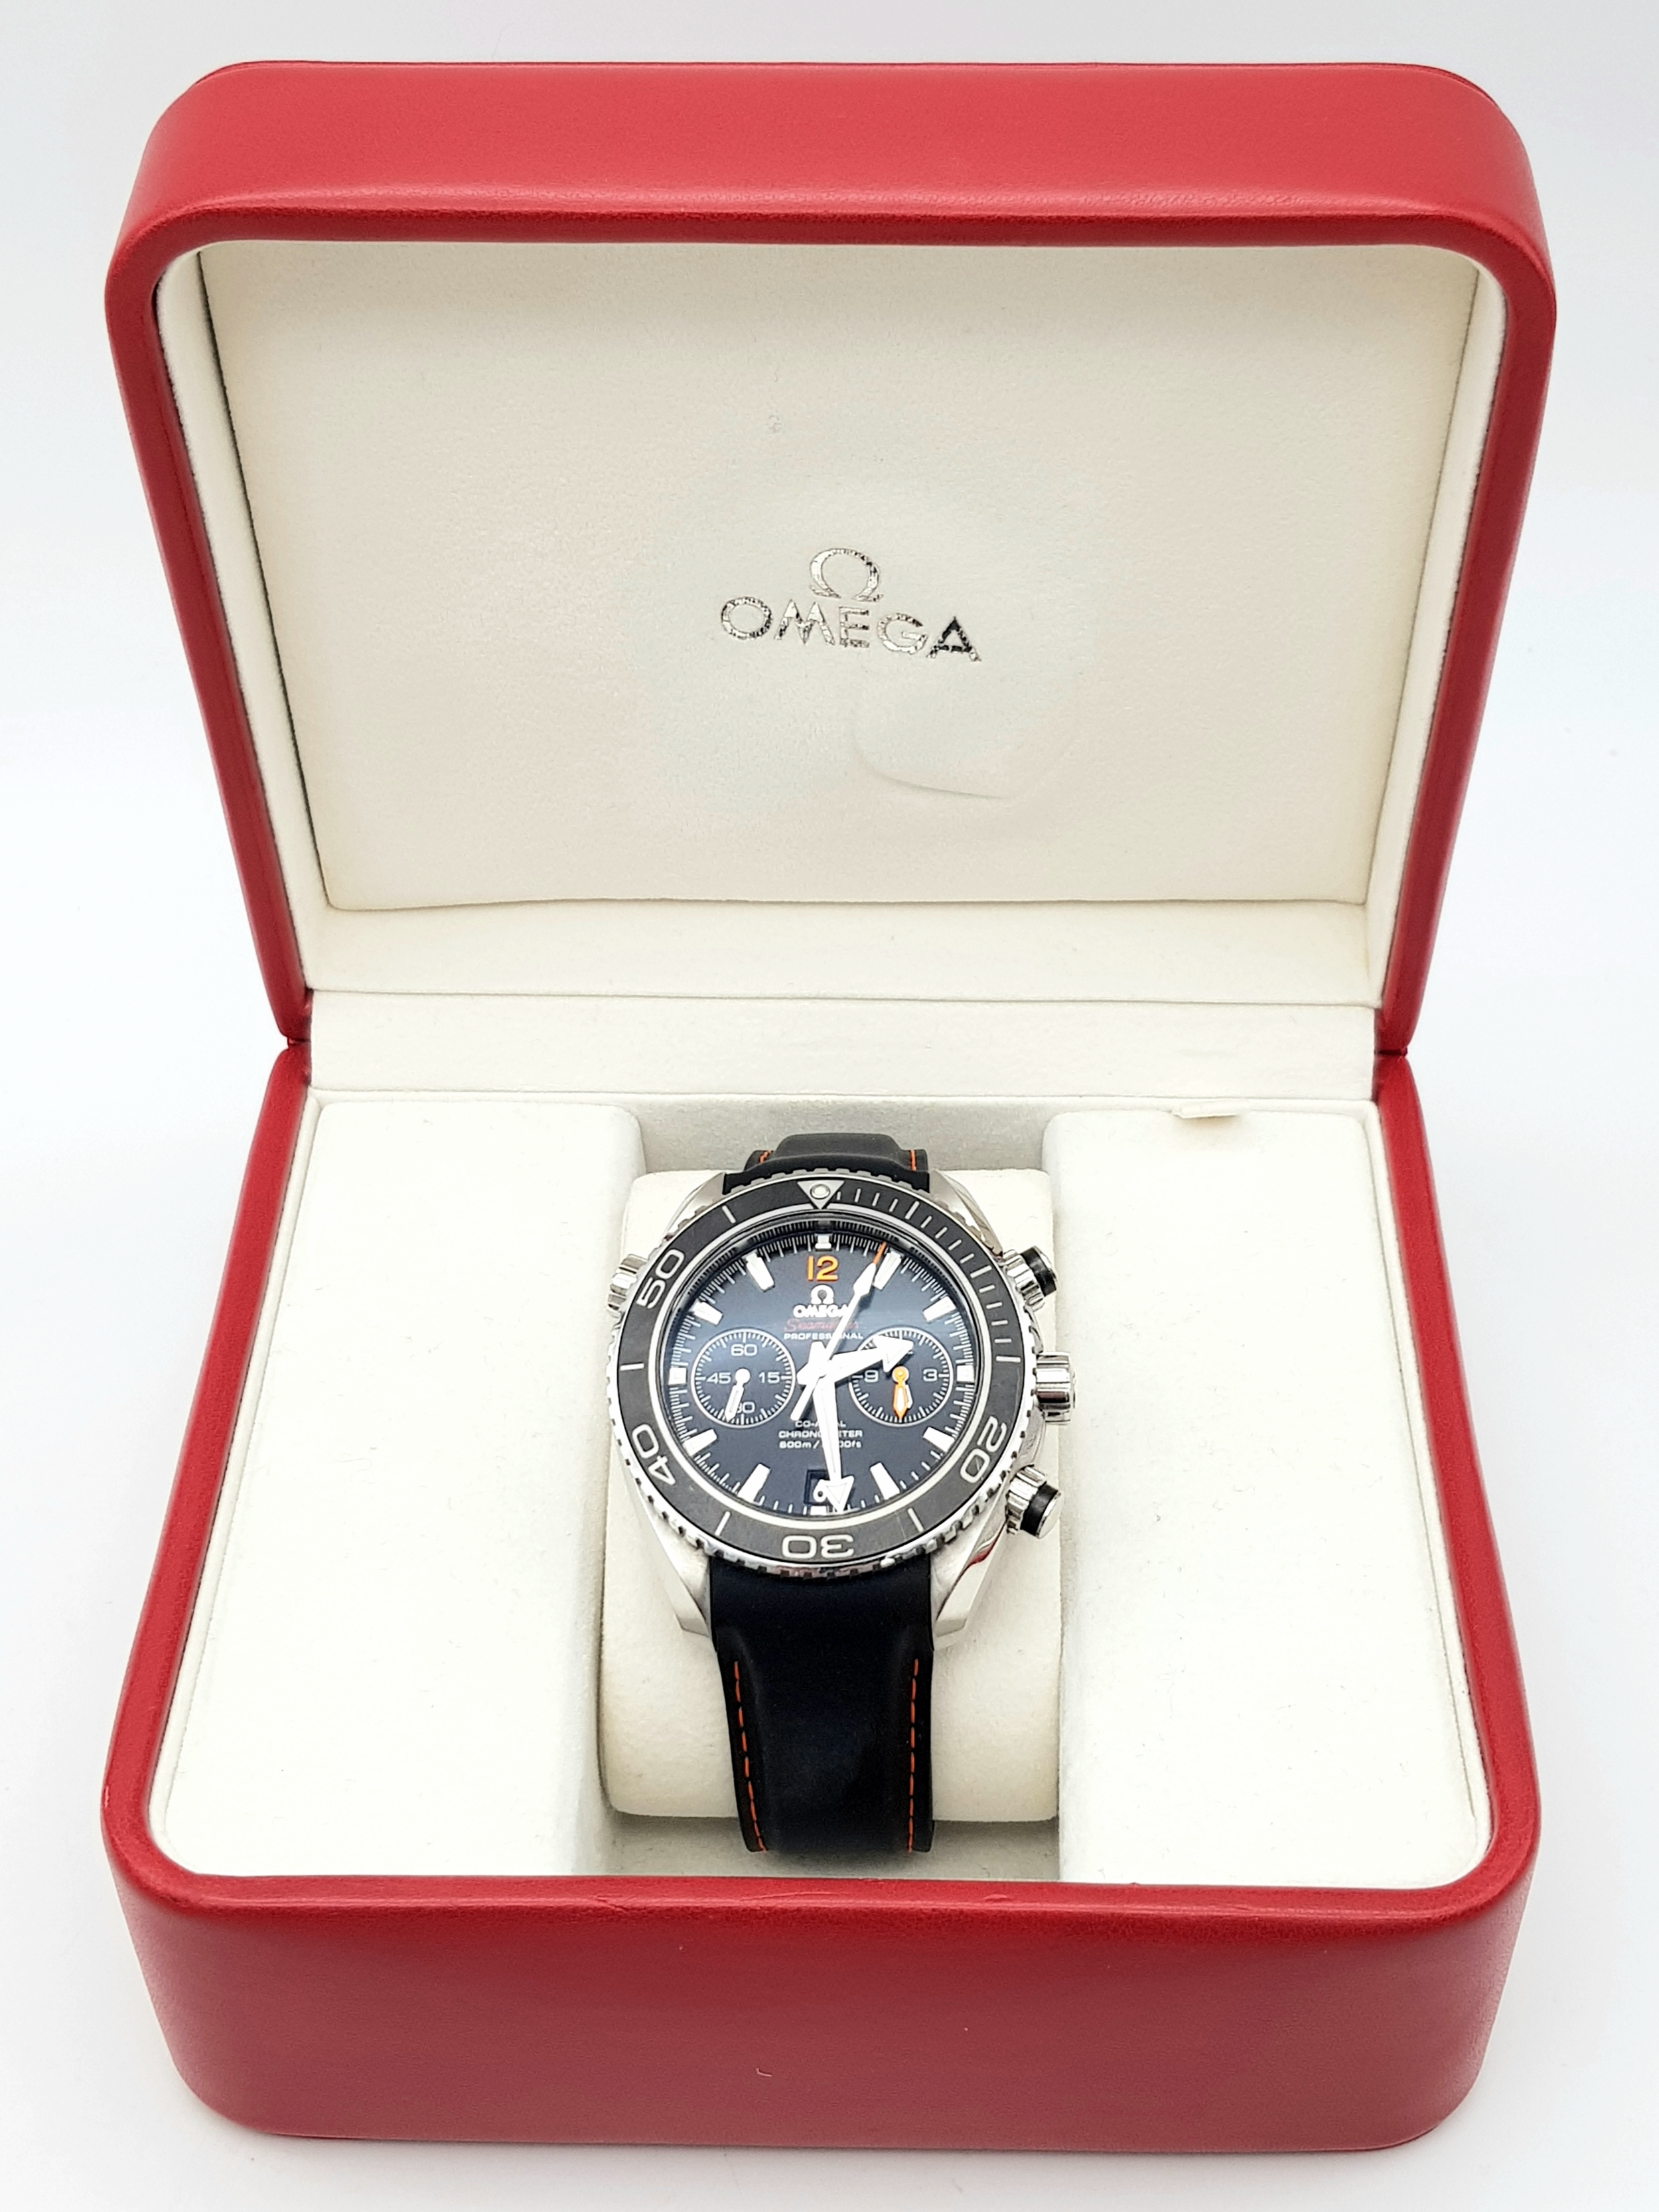 A FANTASTIC EXAMPLE OF AN OMEGA "SEAMASTER" PROFESSIONAL CO-AXIAL CHRONOMETER WITH 2000FT LIMIT . - Image 4 of 8